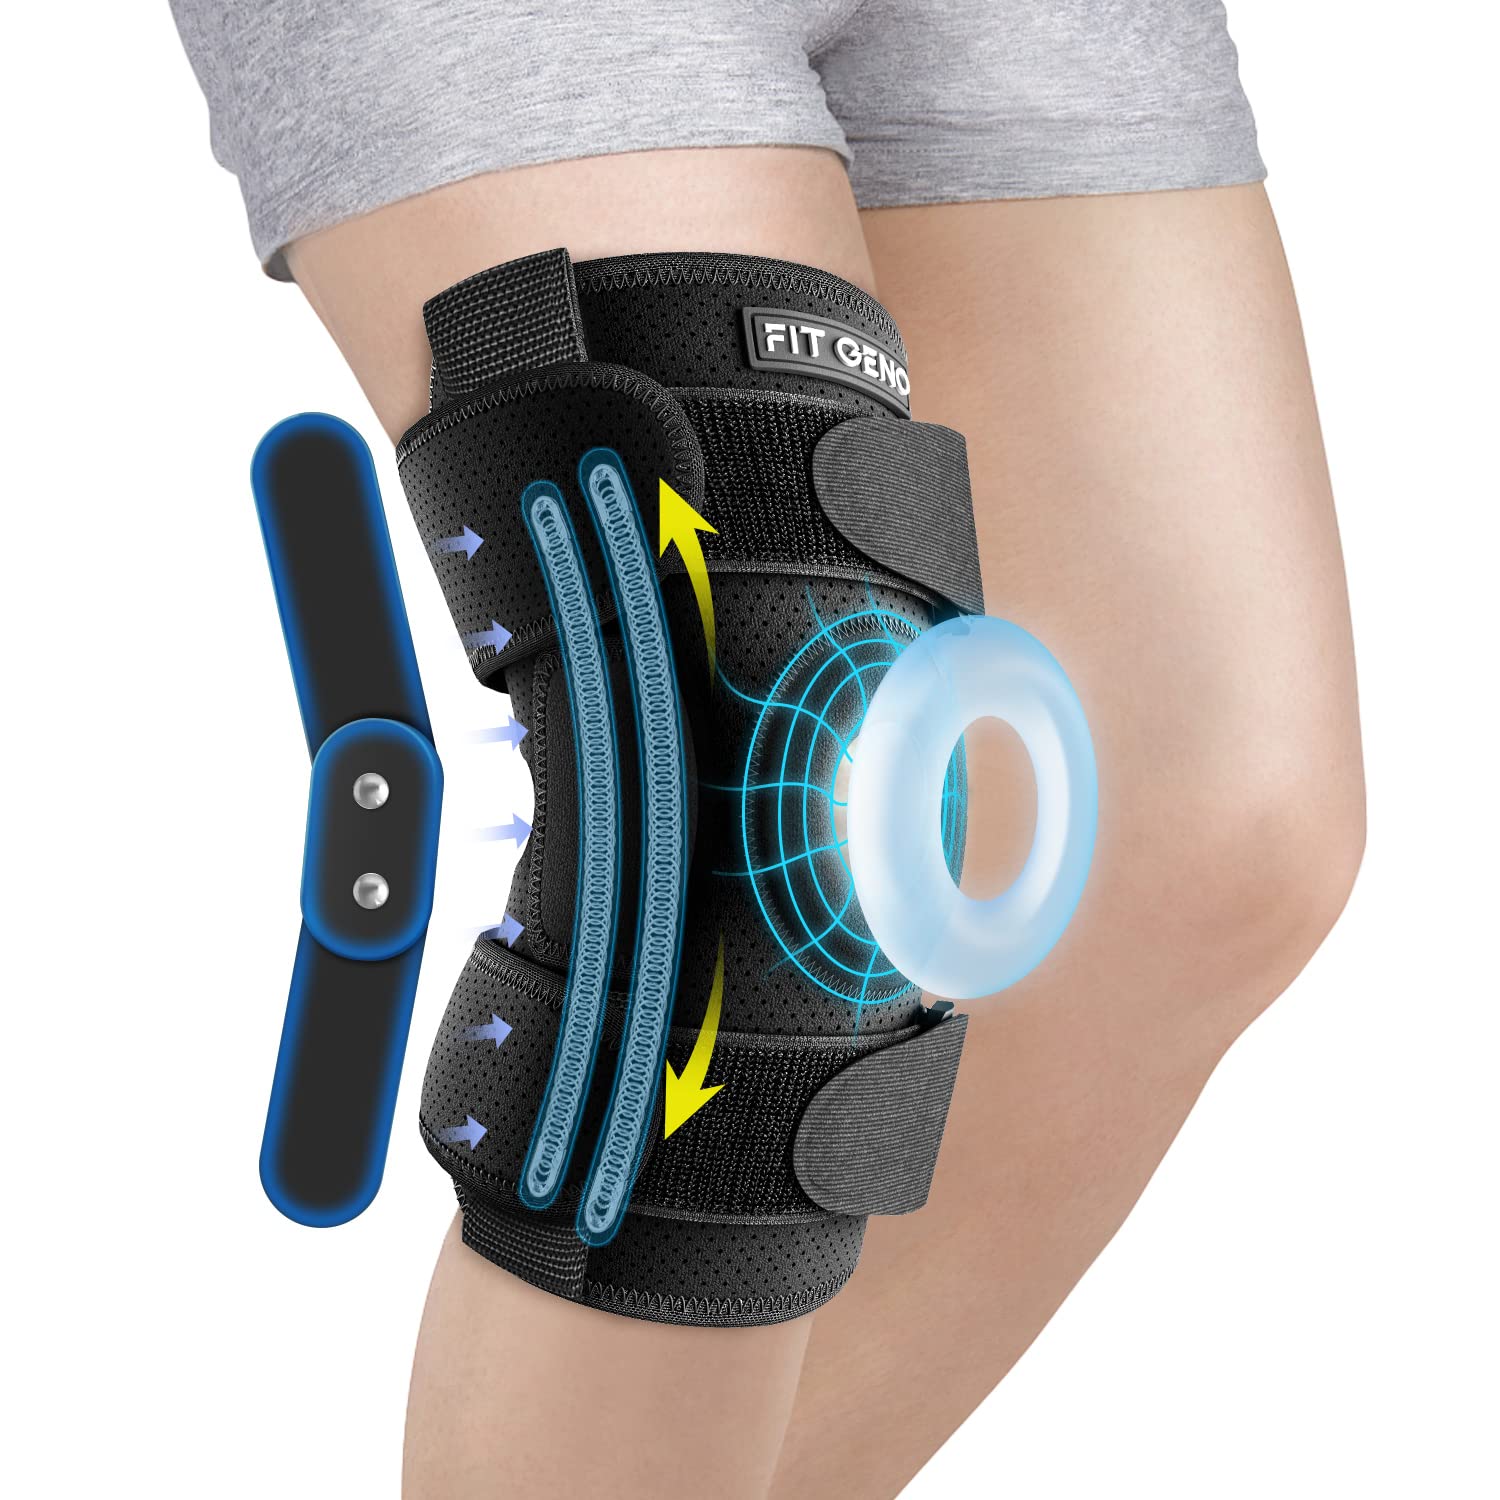 Hinged Knee Support Brace for ACL, MCL, PCL, Ligament Sports